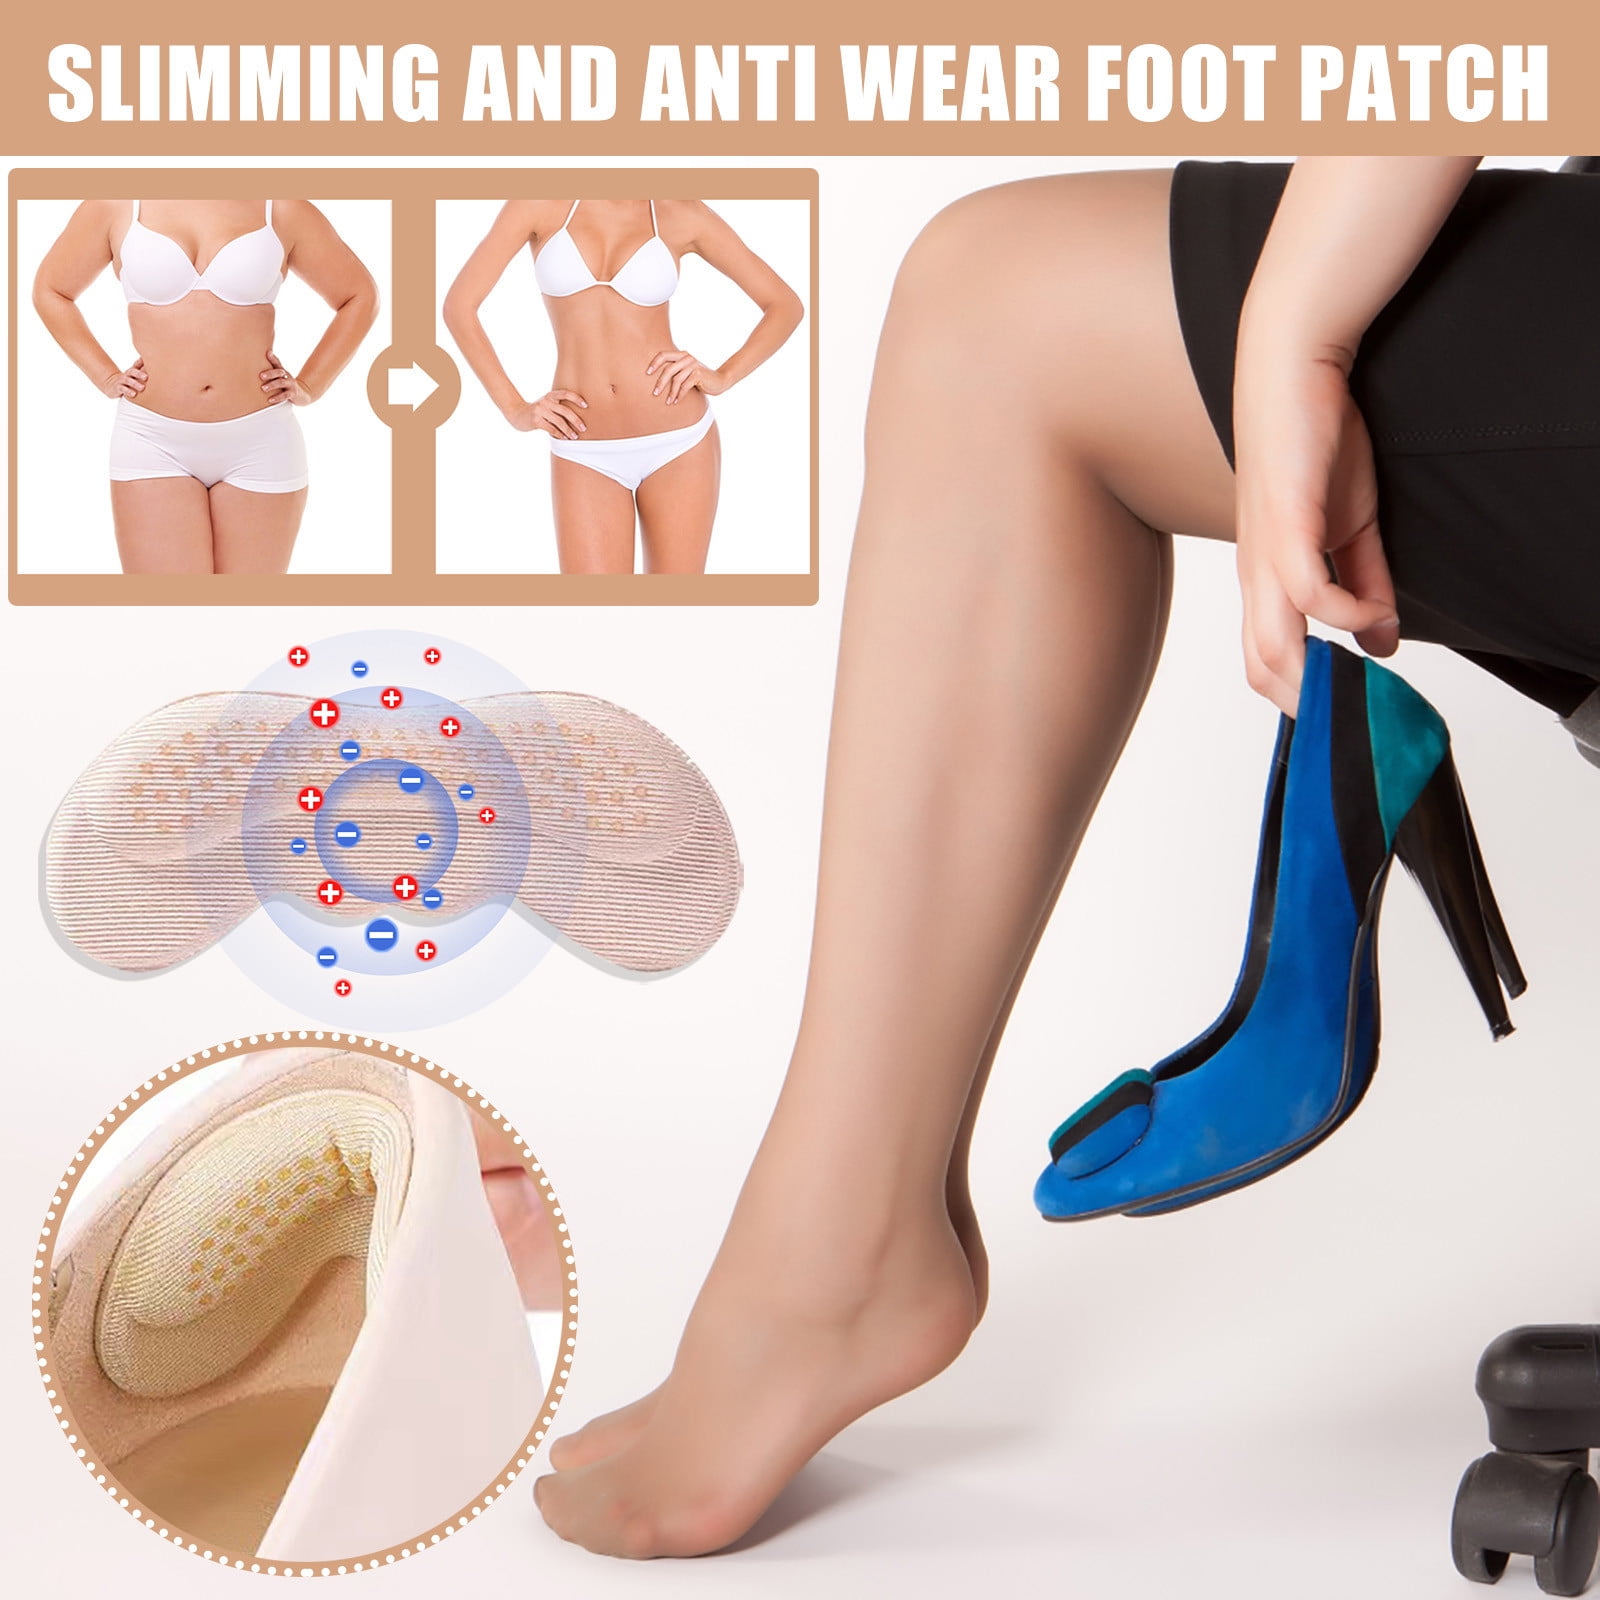 Heel Grips for Women and Men, Self-Adhesive Heel Cushion Inserts Prevent  Heel Slipping, Improve Shoes Too Big, Rubbing, Blisters, Foot Pain - Walmart .com